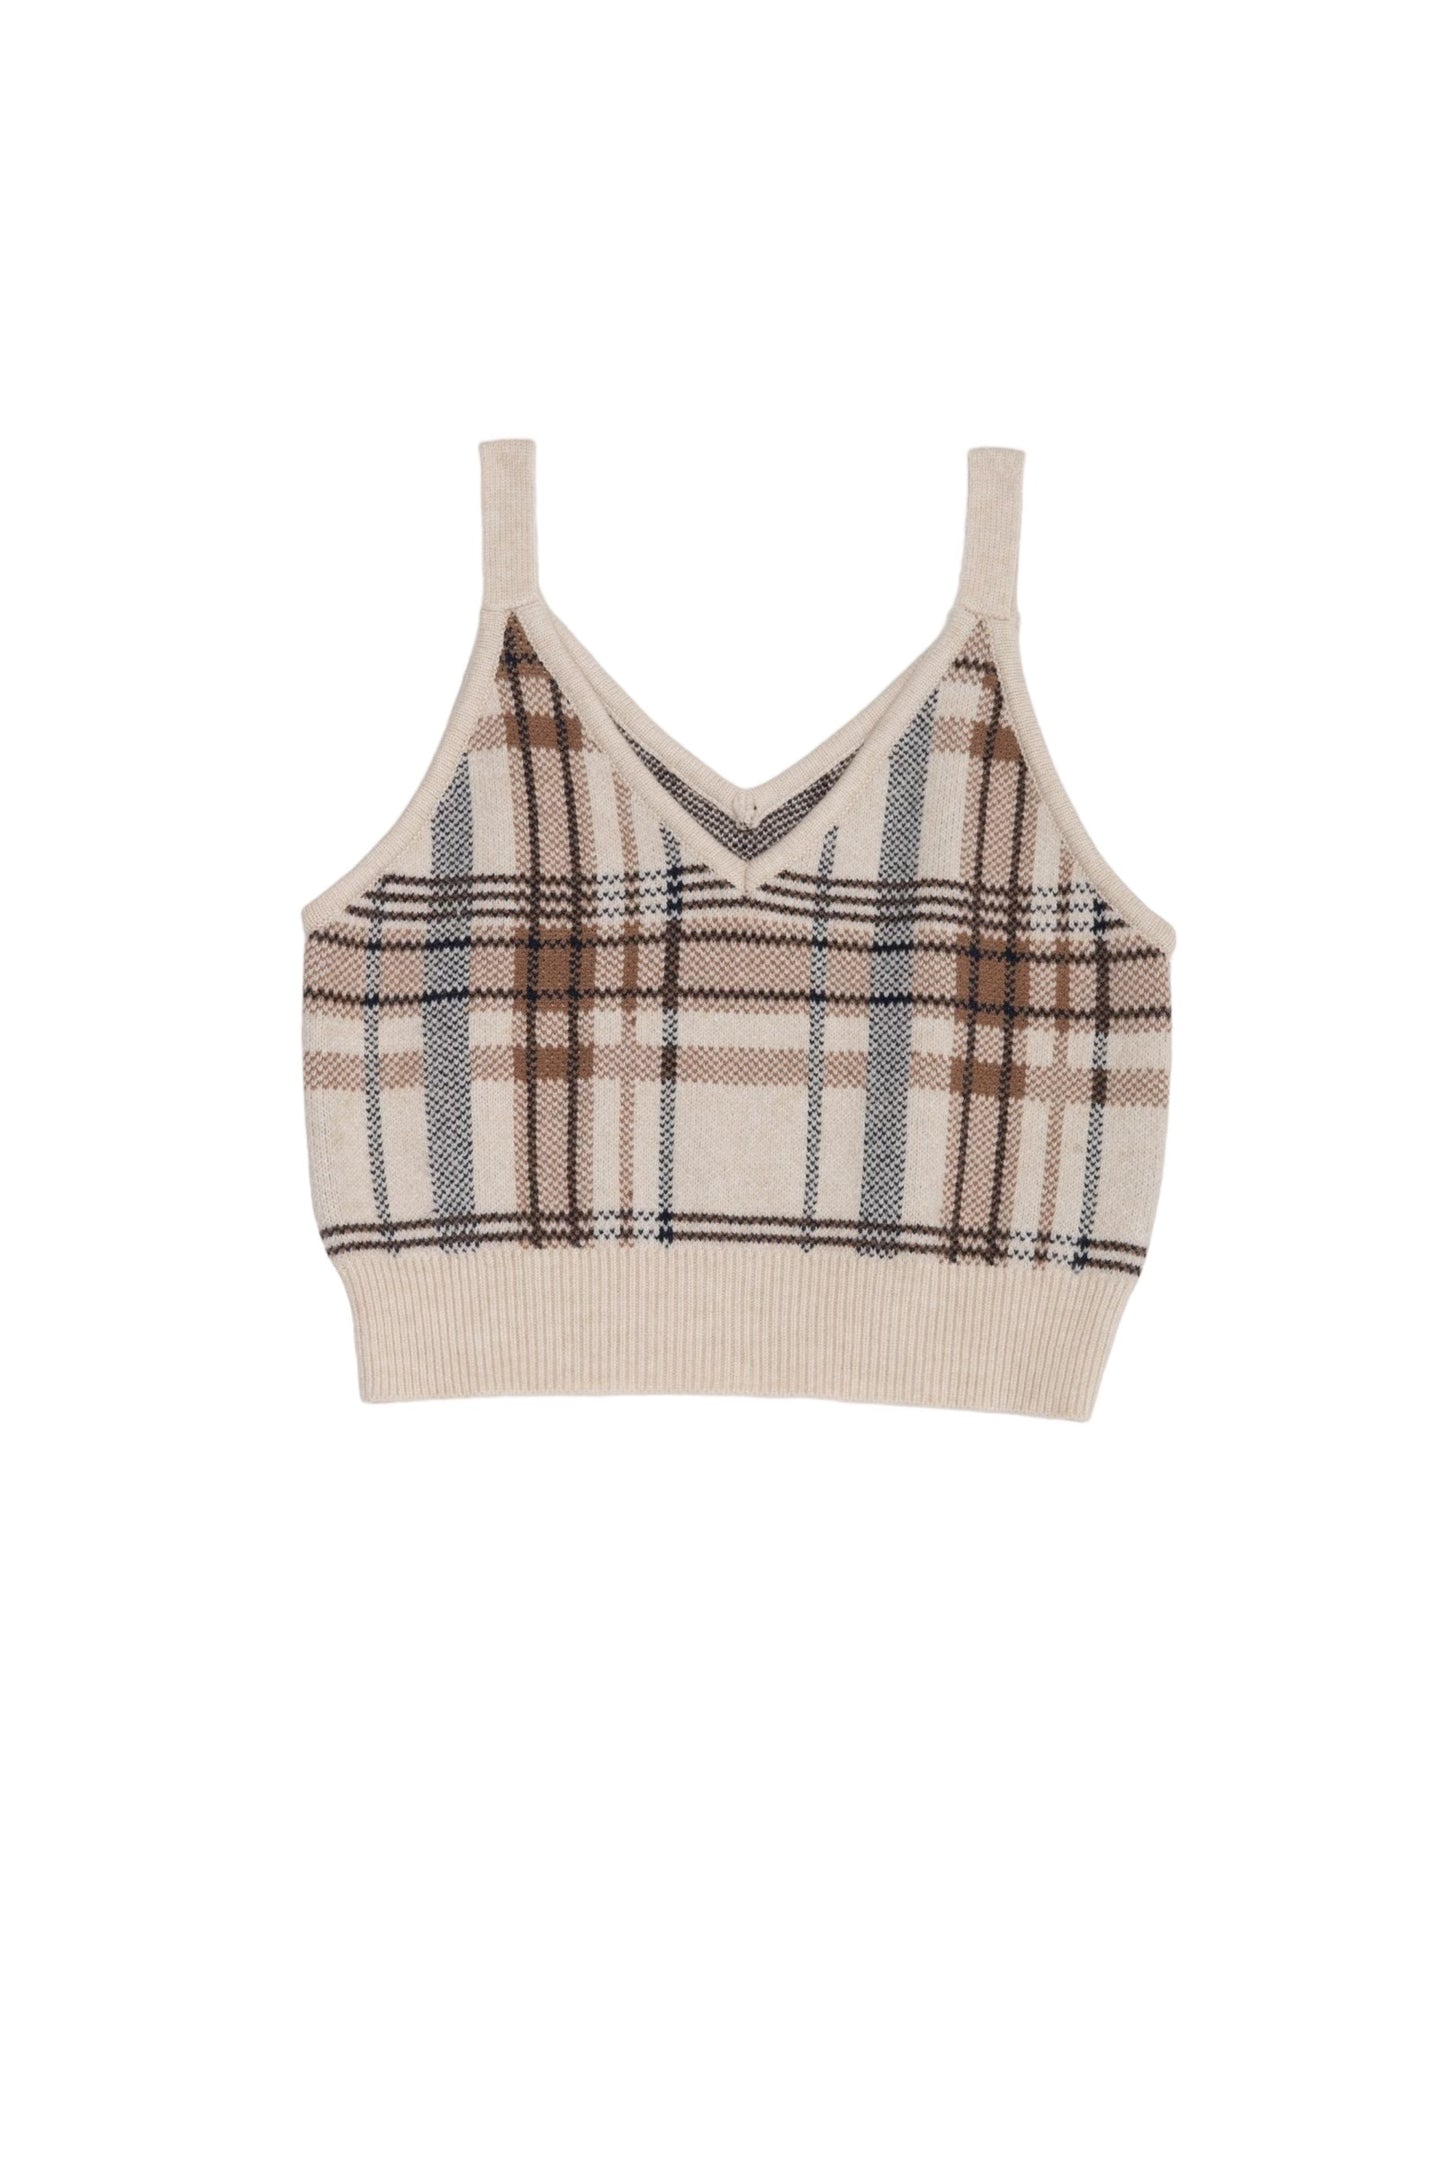 DOUBLE FOUR SIX-Silicon Print Checked Knit Vest Beige Check